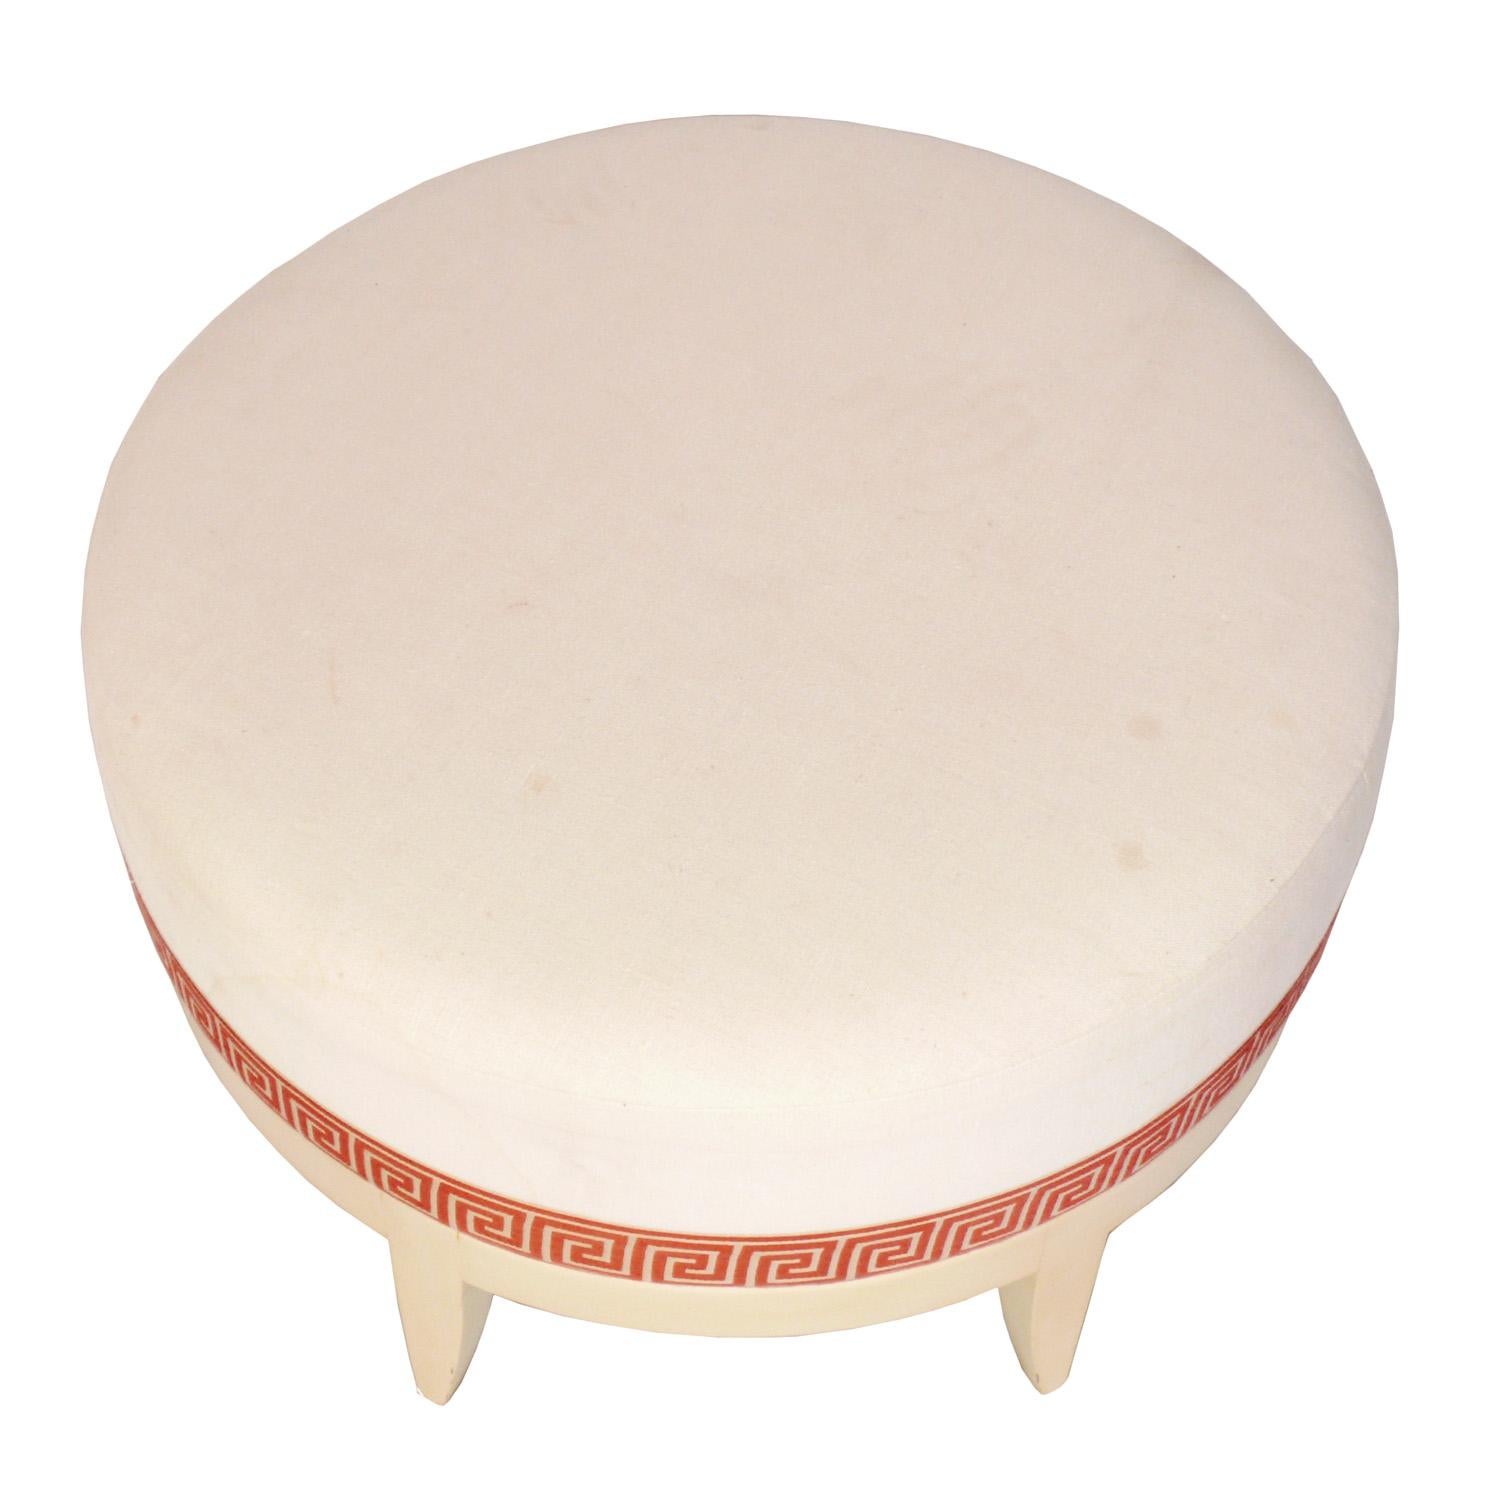 Pair of Elegant White Lacquered Large Scale Stools or Ottomans, American, circa 1990s. These stools have various stools and will need to be reupholstered. The price noted INCLUDES upholstery in your fabric. Simply send us 5 yards total of your